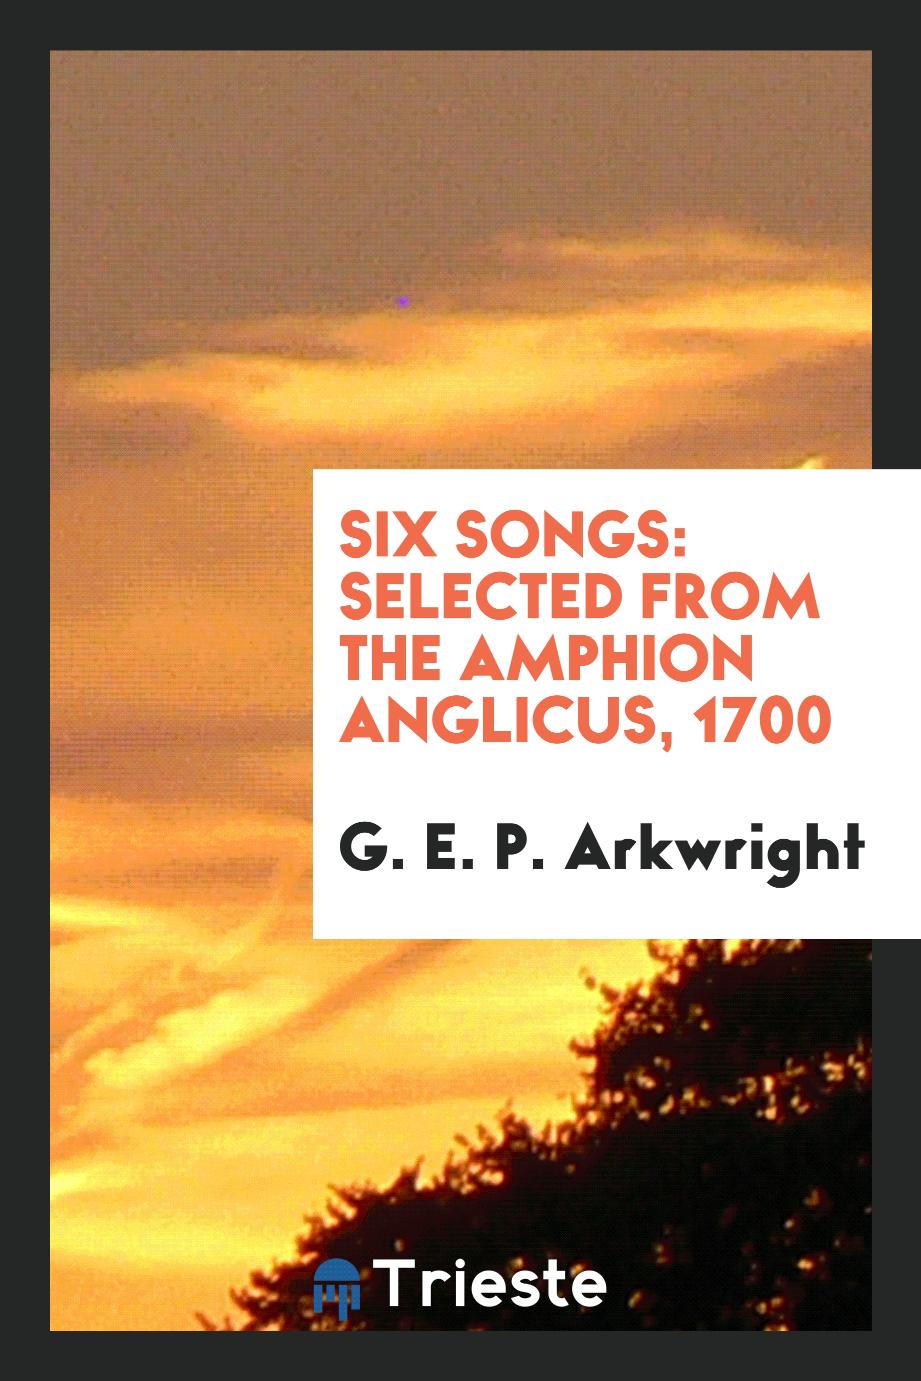 Six Songs: Selected from the Amphion Anglicus, 1700